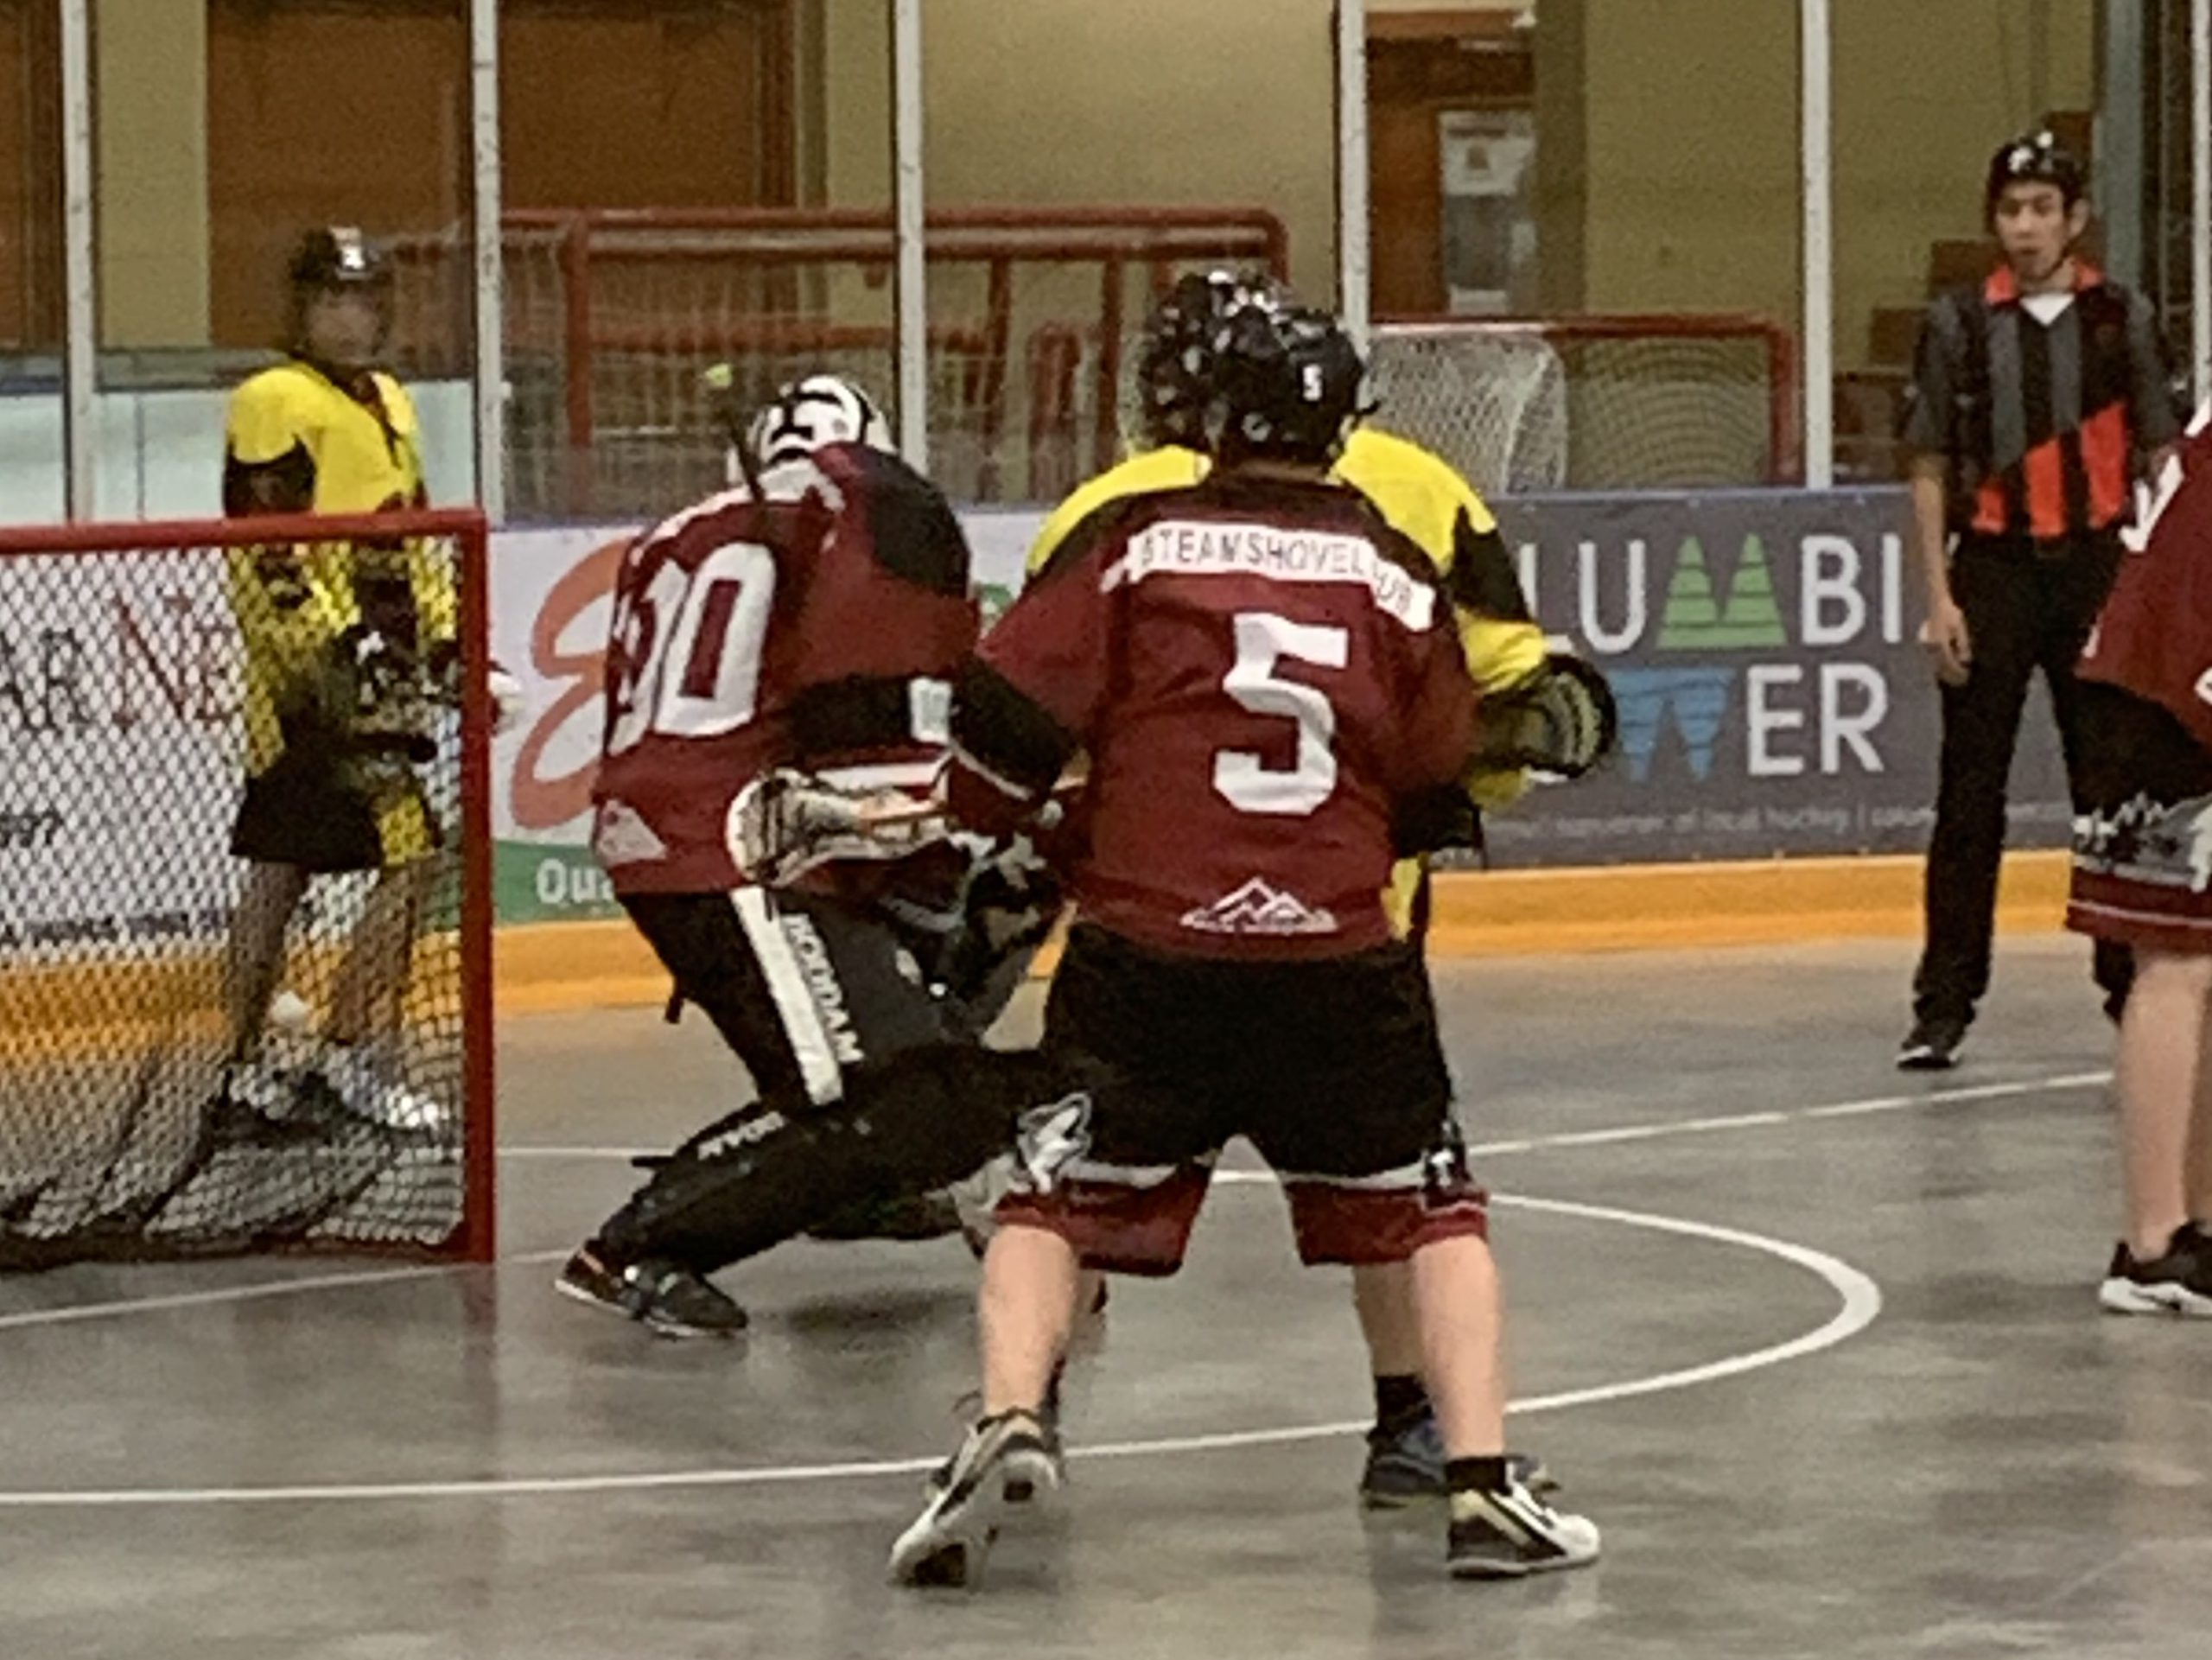 Timberwolves rebound from loss to Calgary Axemen in win over Olds Stingers